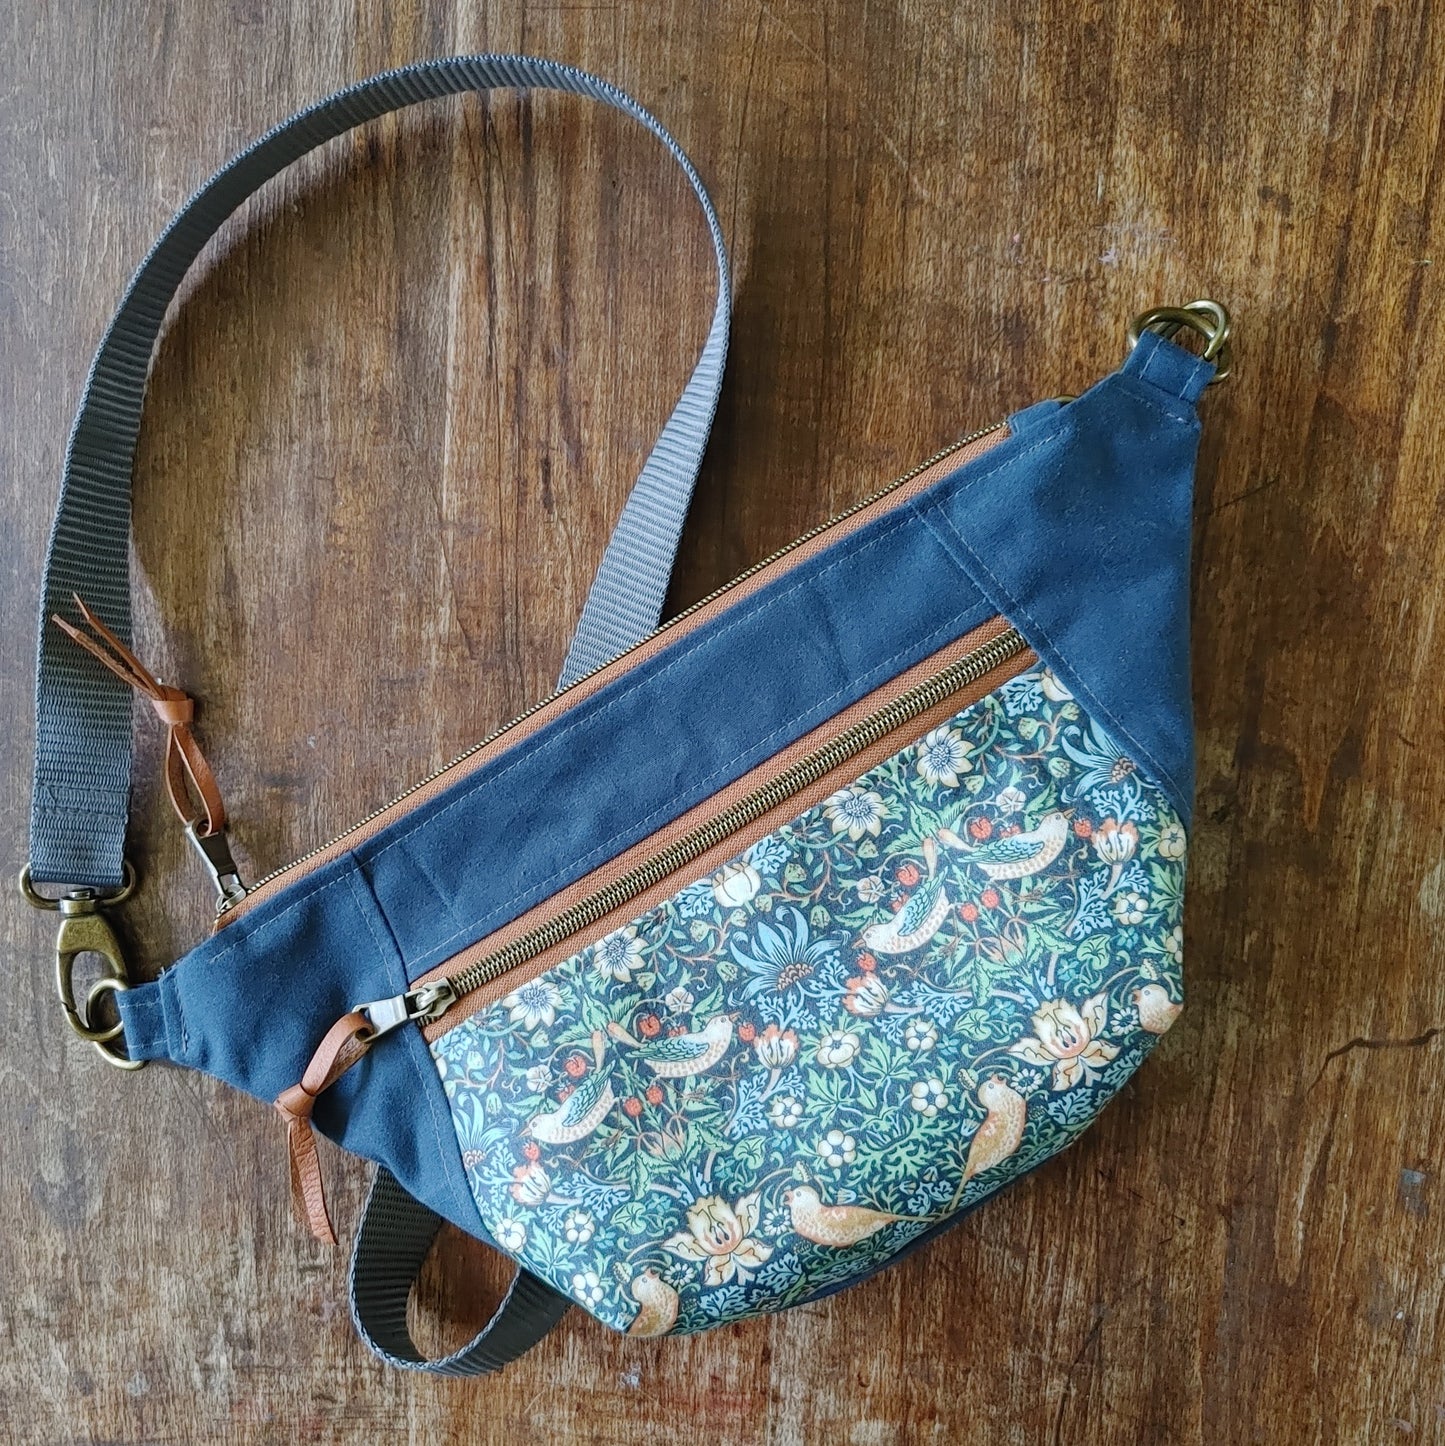 Handbag in Strawberry Thief by William Morris print. Made in Canada by Plumage Studio Accessories